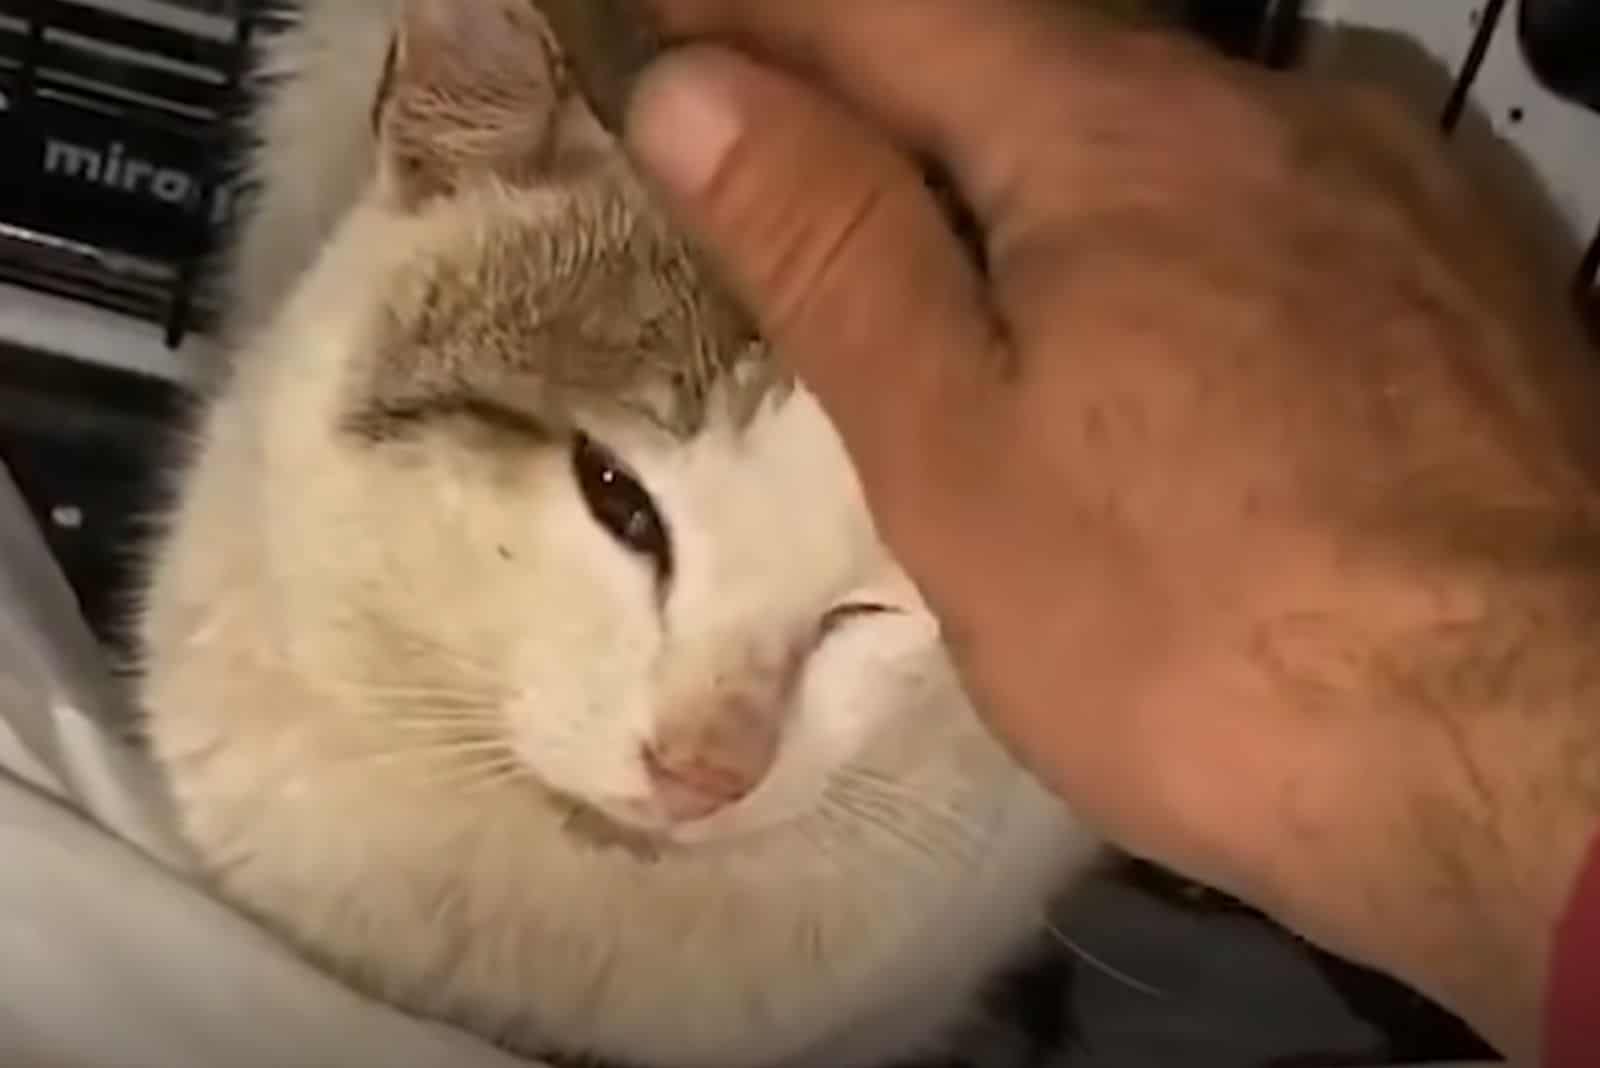 the cat enjoys being petted